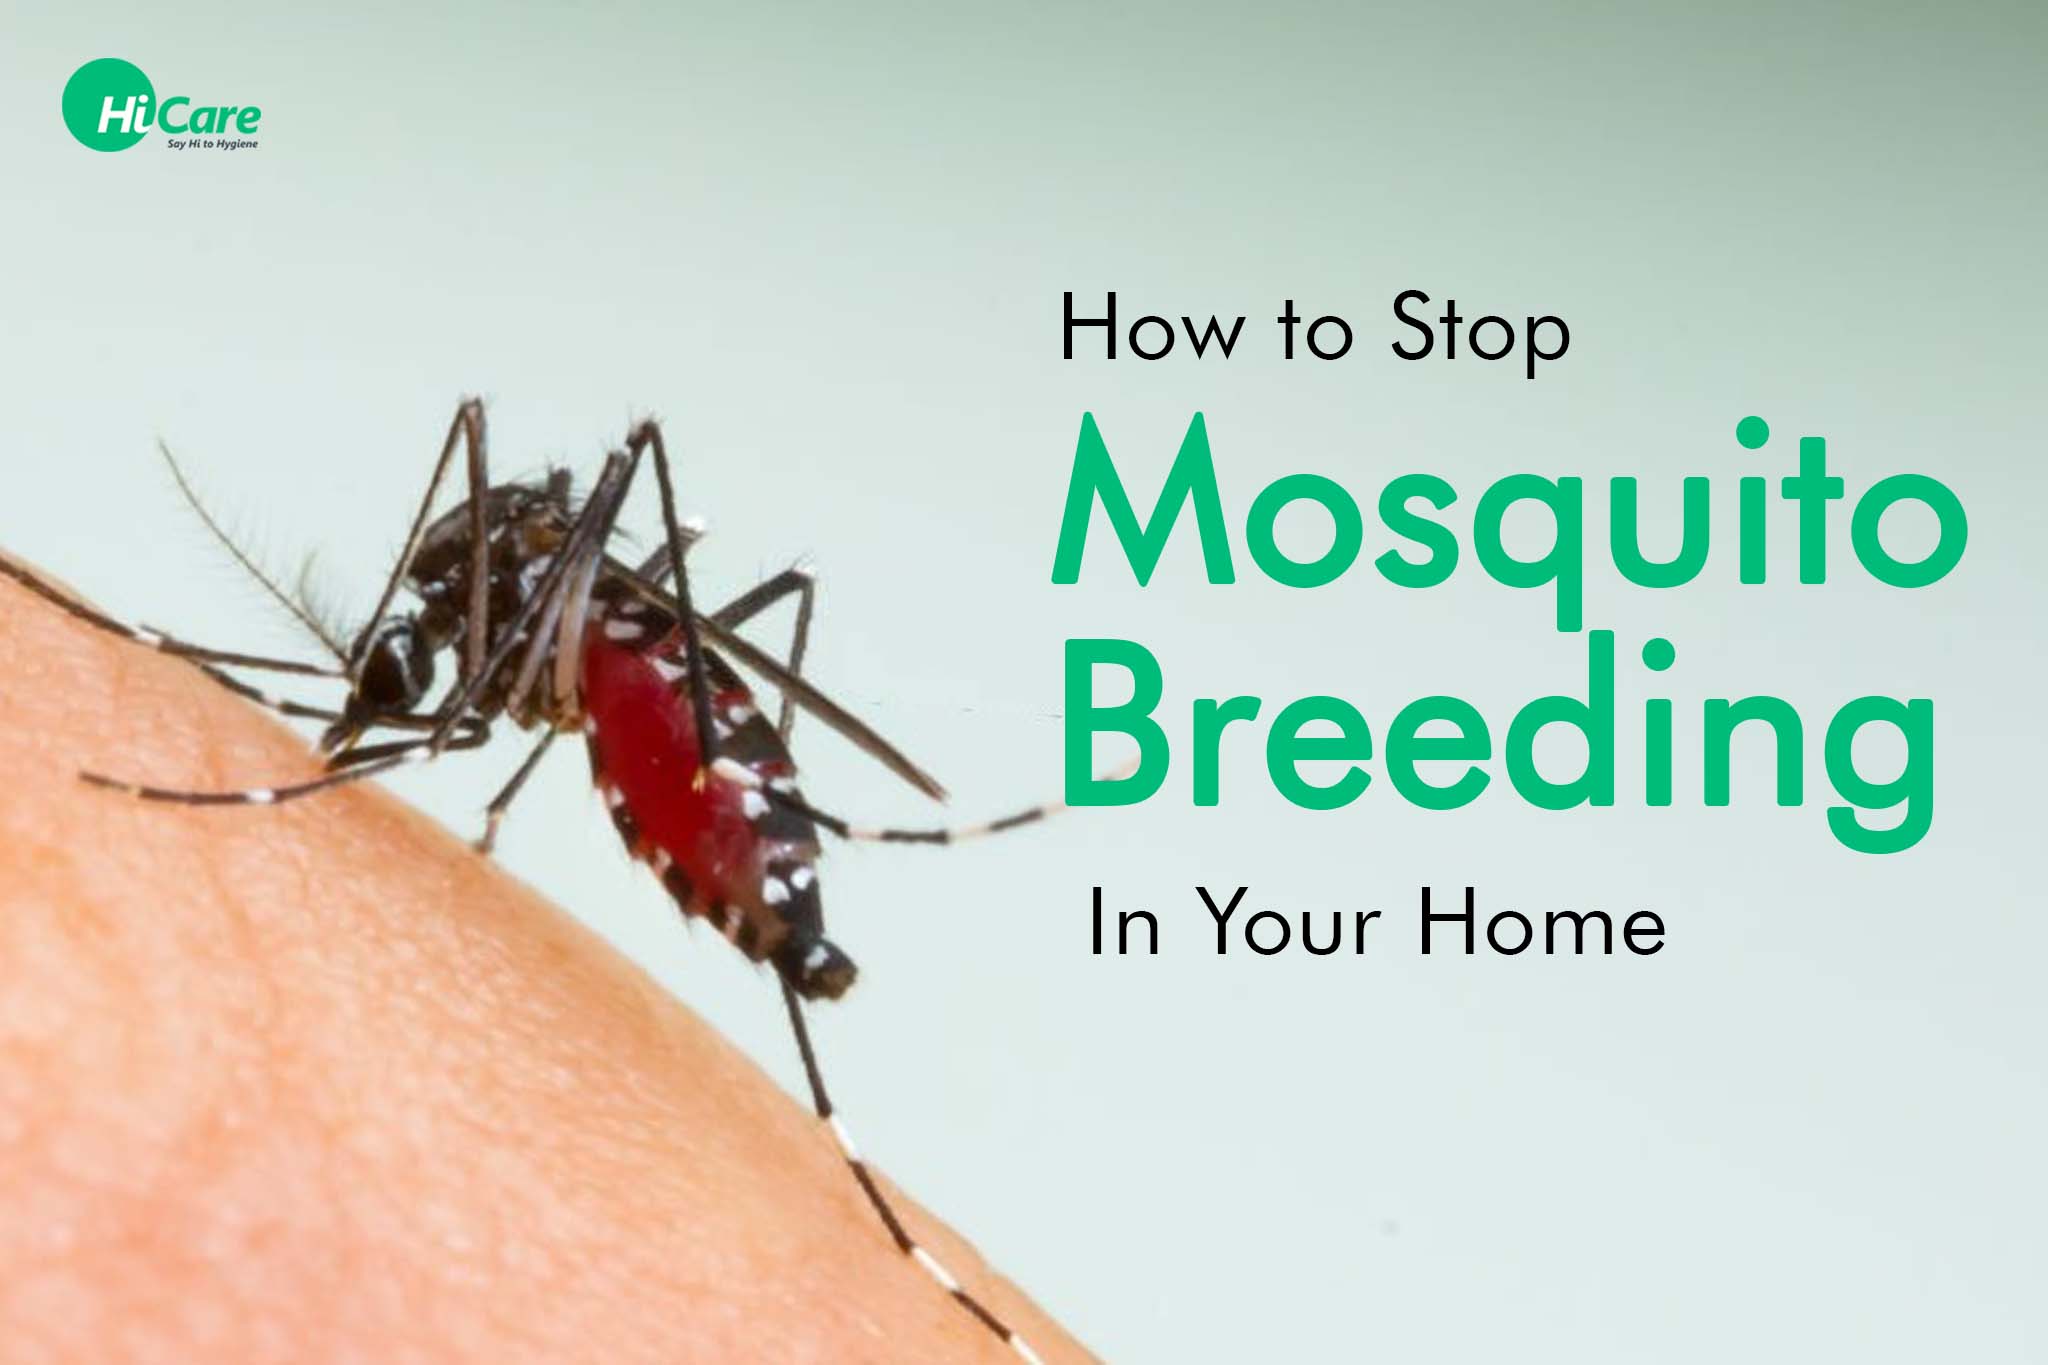 How to Stop Mosquito Breeding in Your Home?